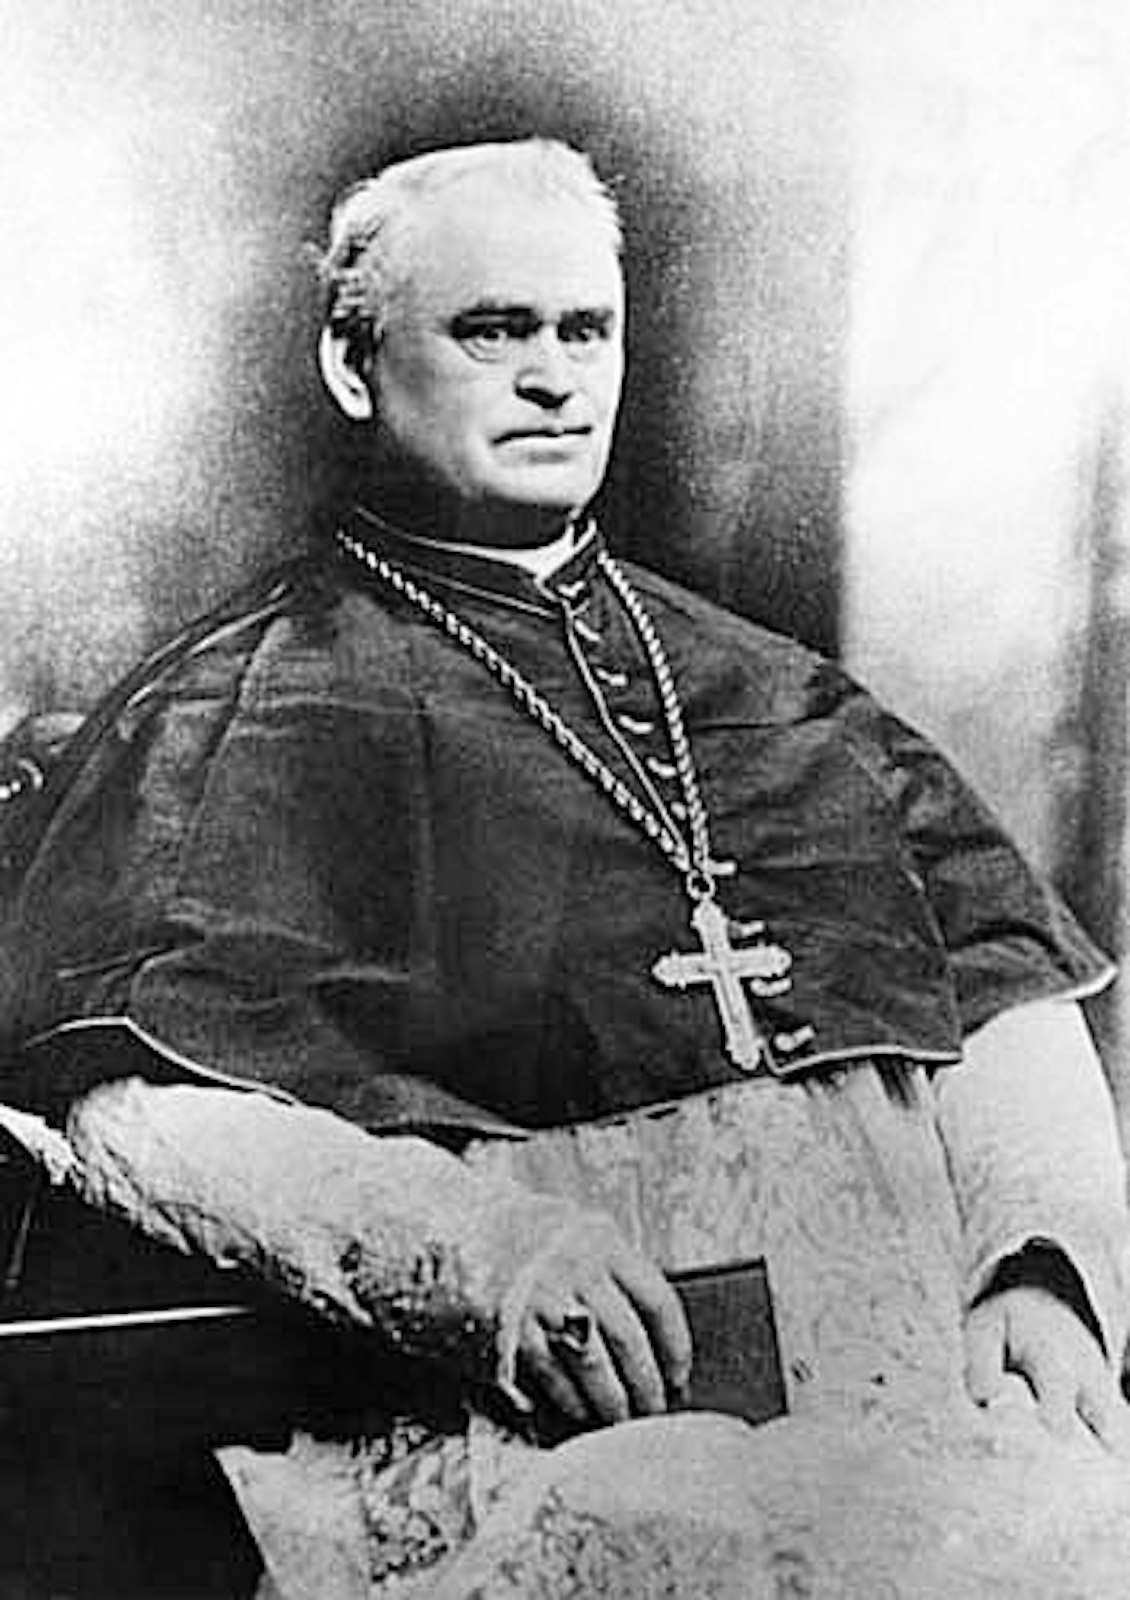 Bishop Patrick Manogue is pictured seated with a Bible in traditional choir dress, cassock and rochet in the 1880s.